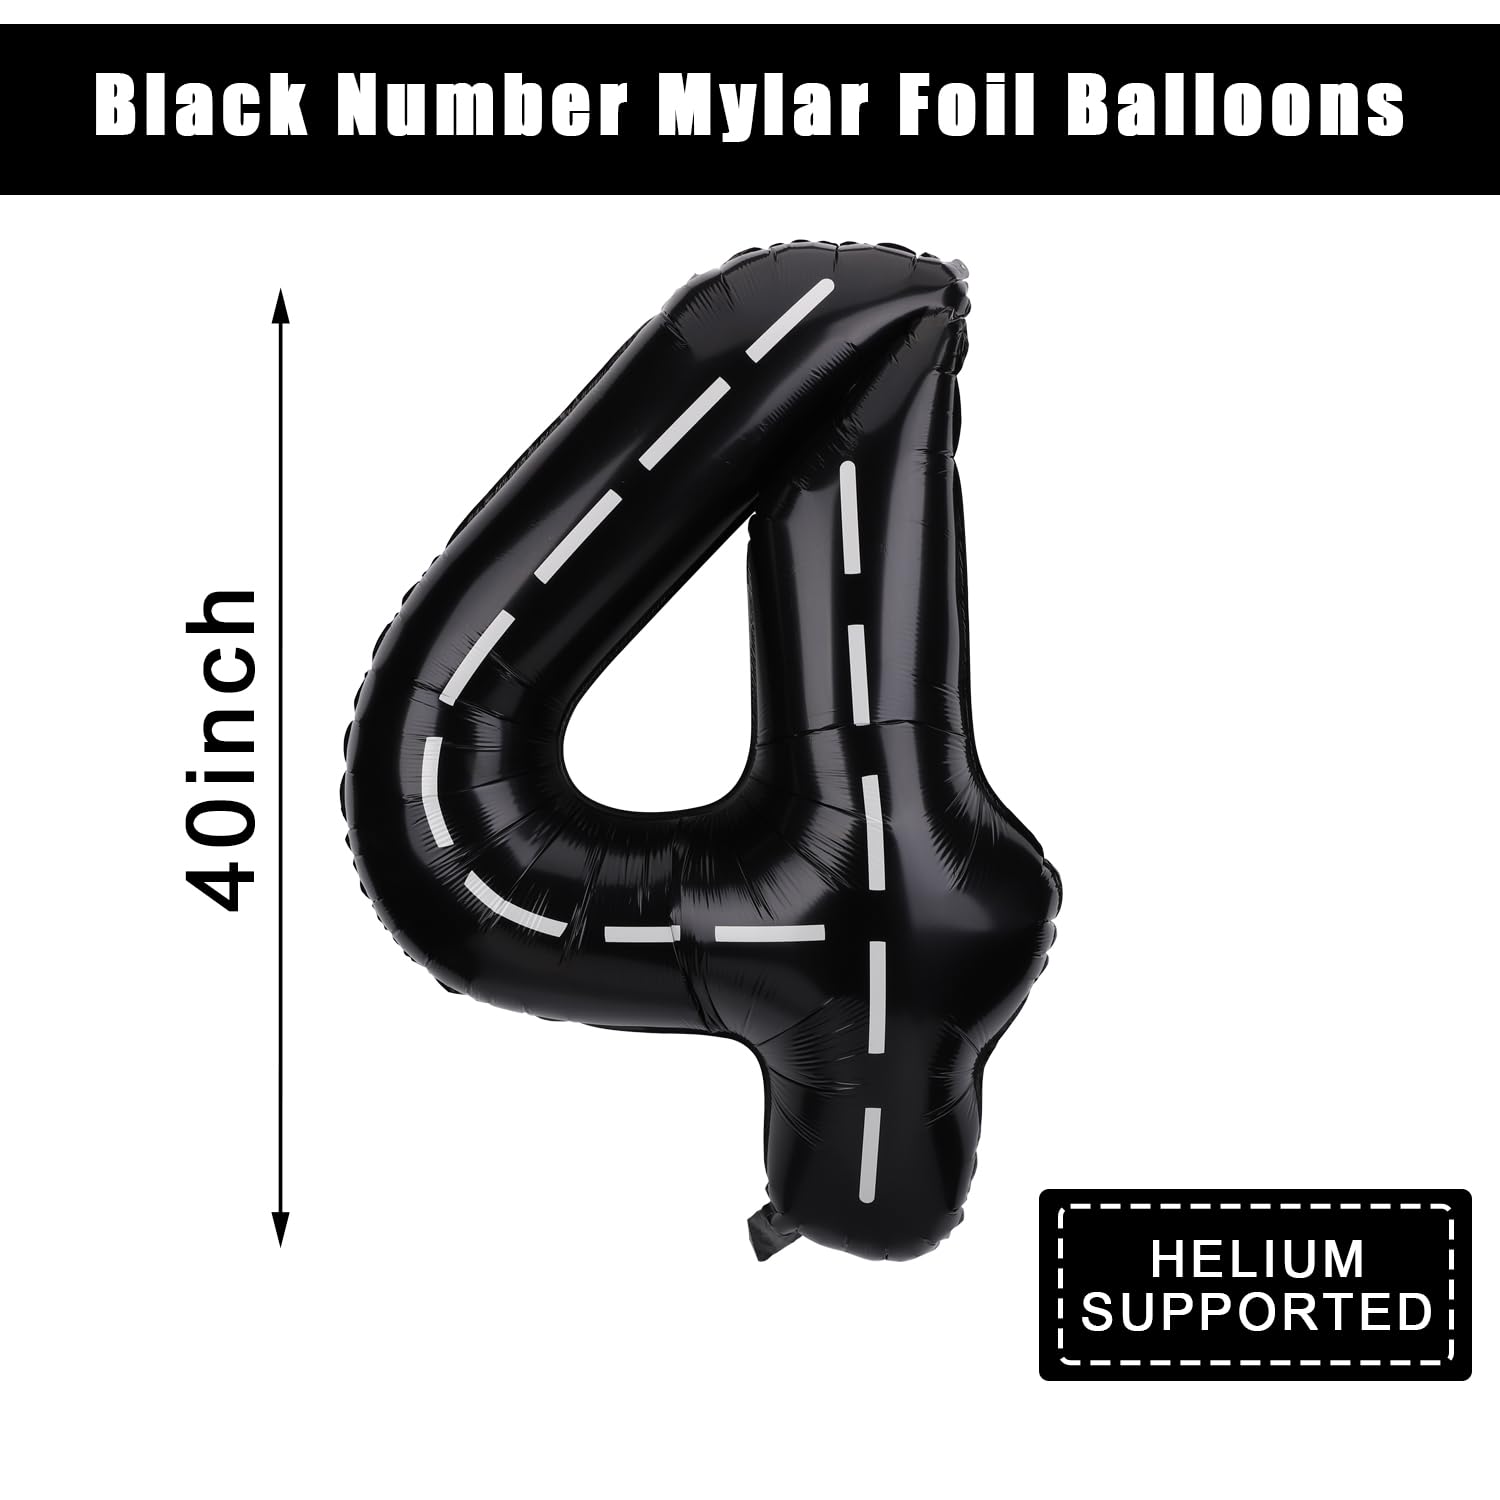 Race Car Balloon Number, 40 Inches Large Black Racetrack Number Balloon Race Car Birthday Balloons Race Car Theme Party Decorations for Boys' Birthday Party Baby Shower(4)